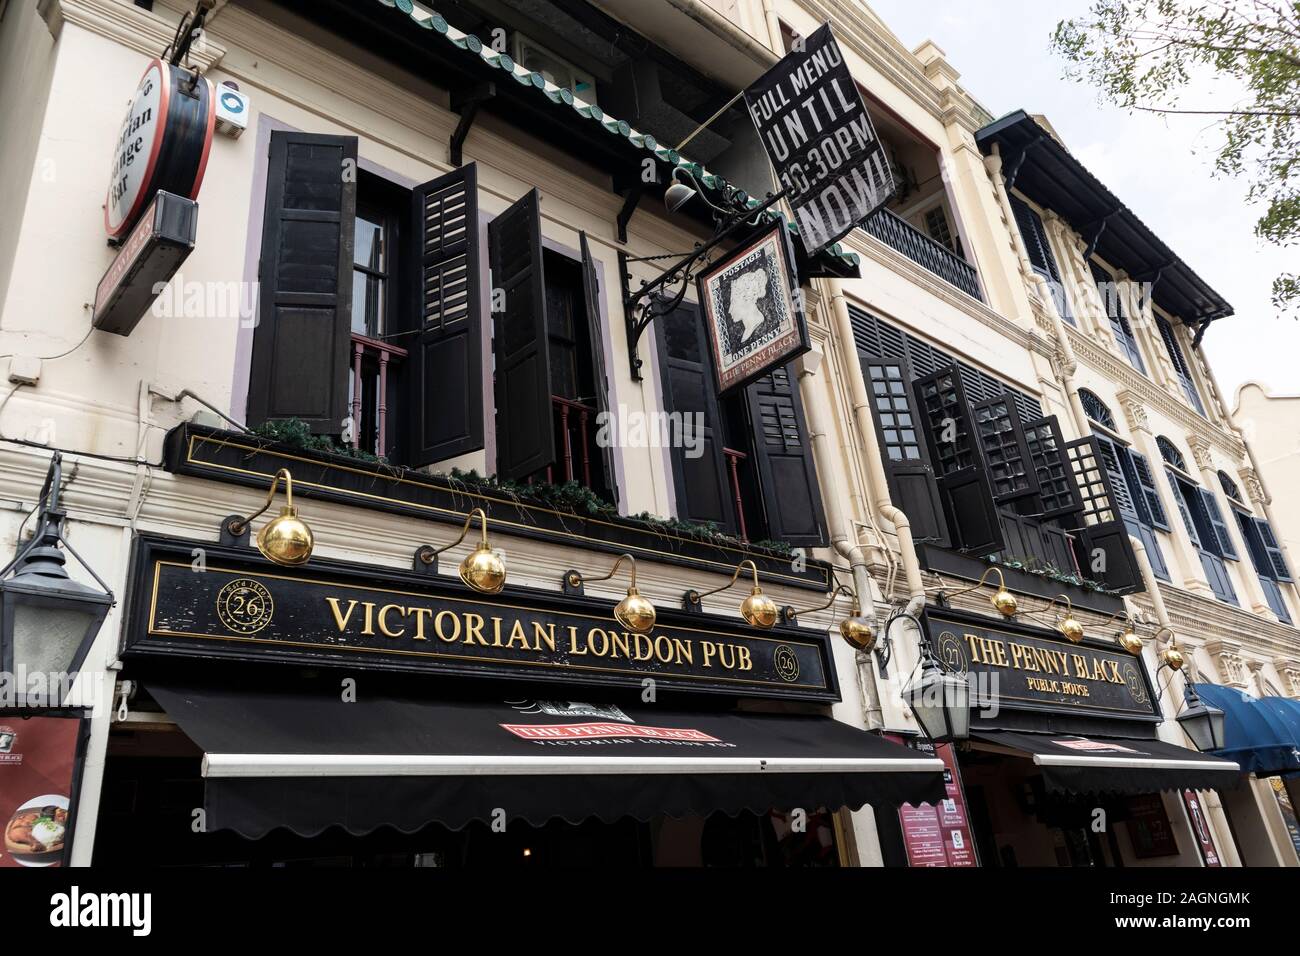 The Victorian London Pub and The Penny Black Pub on the River Sing opposite Clarke Quay, Singapore Stock Photo